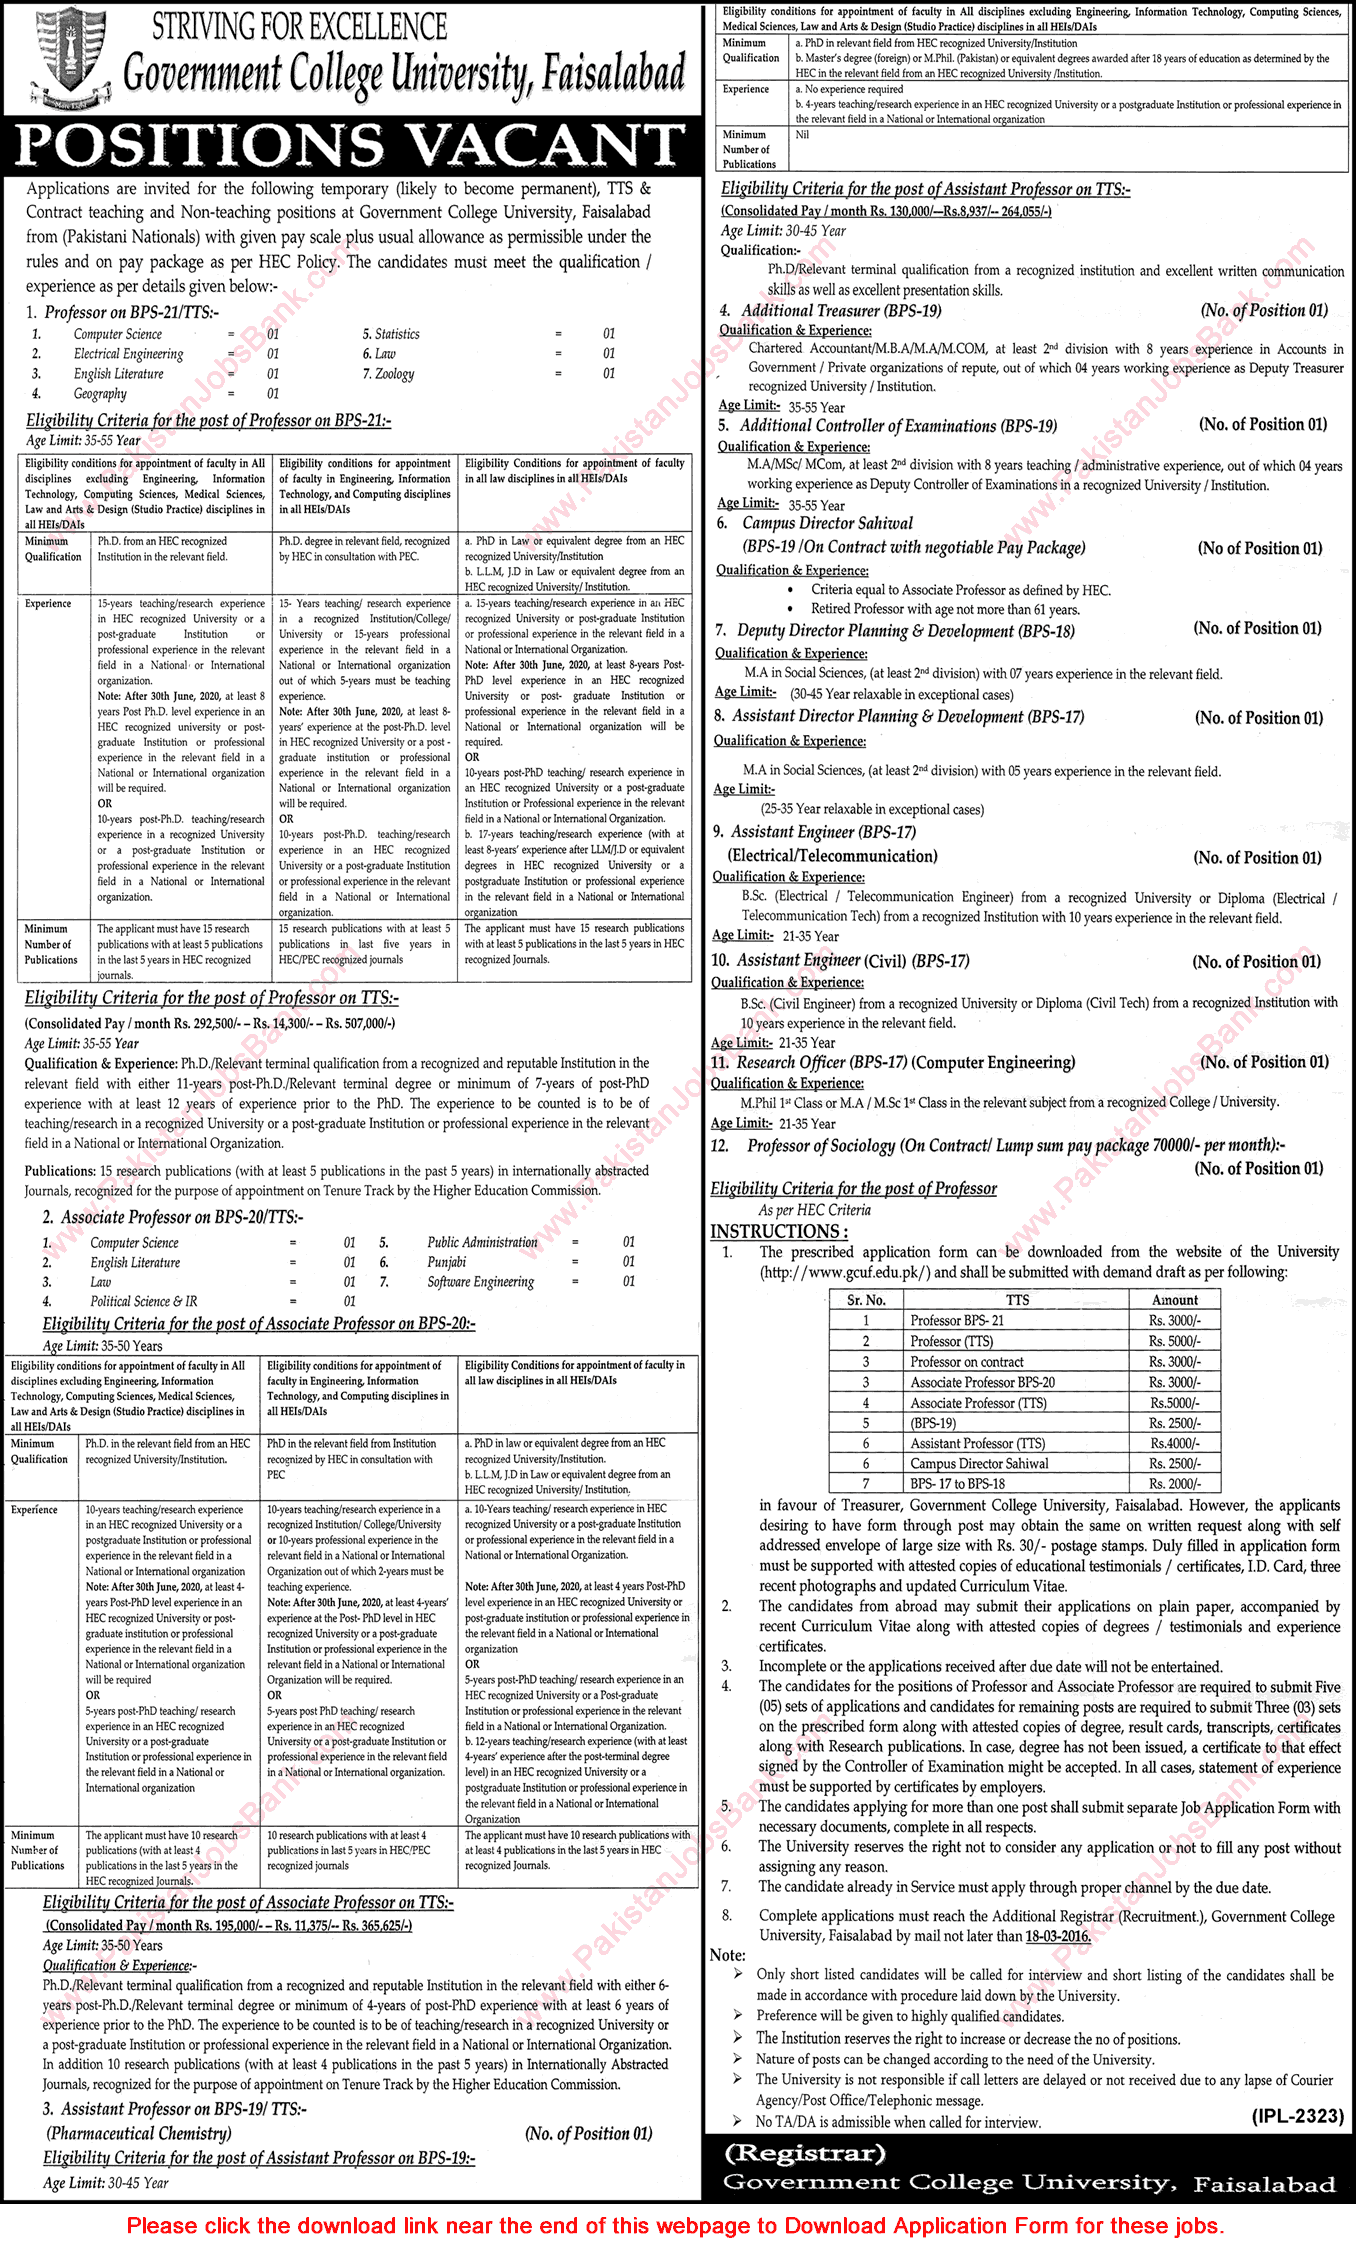 GC University Faisalabad Jobs 2016 March Application Form Teaching Faculty & Others Latest Advertisement